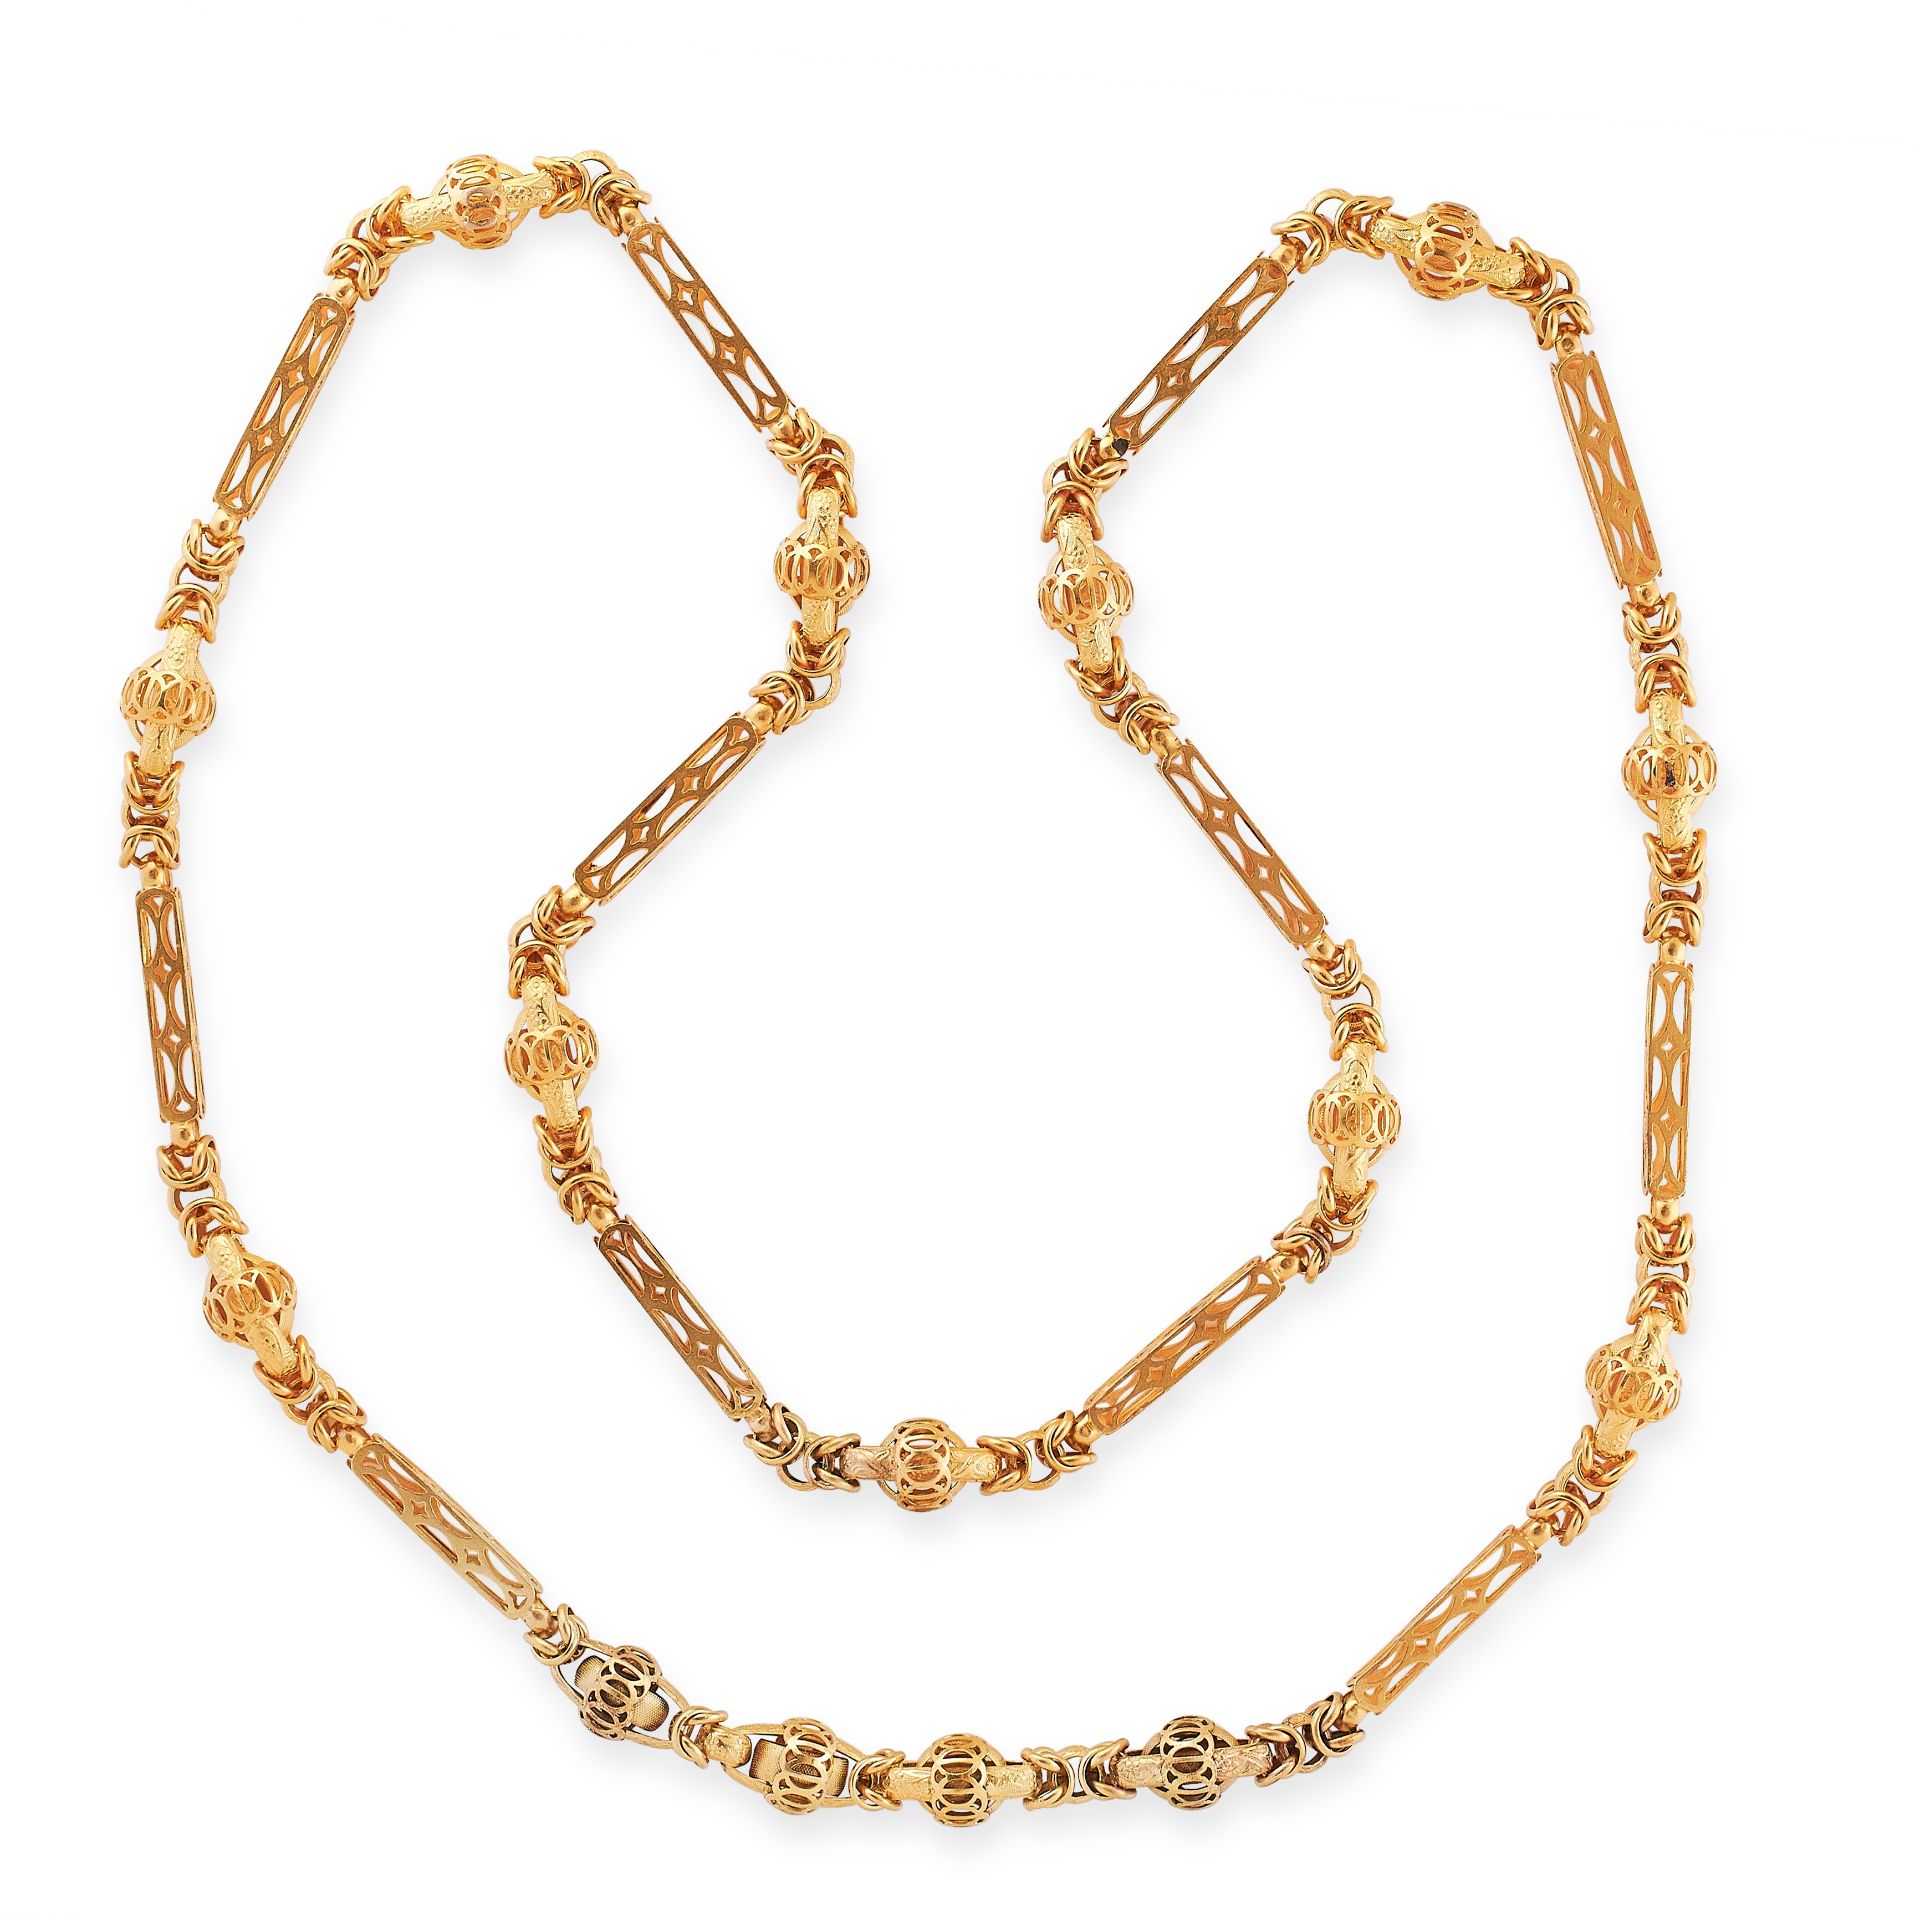 EXCEPTIONAL ANTIQUE FANCY LINK SAUTOIR NECKLACE in yellow gold, formed of a series of alternating